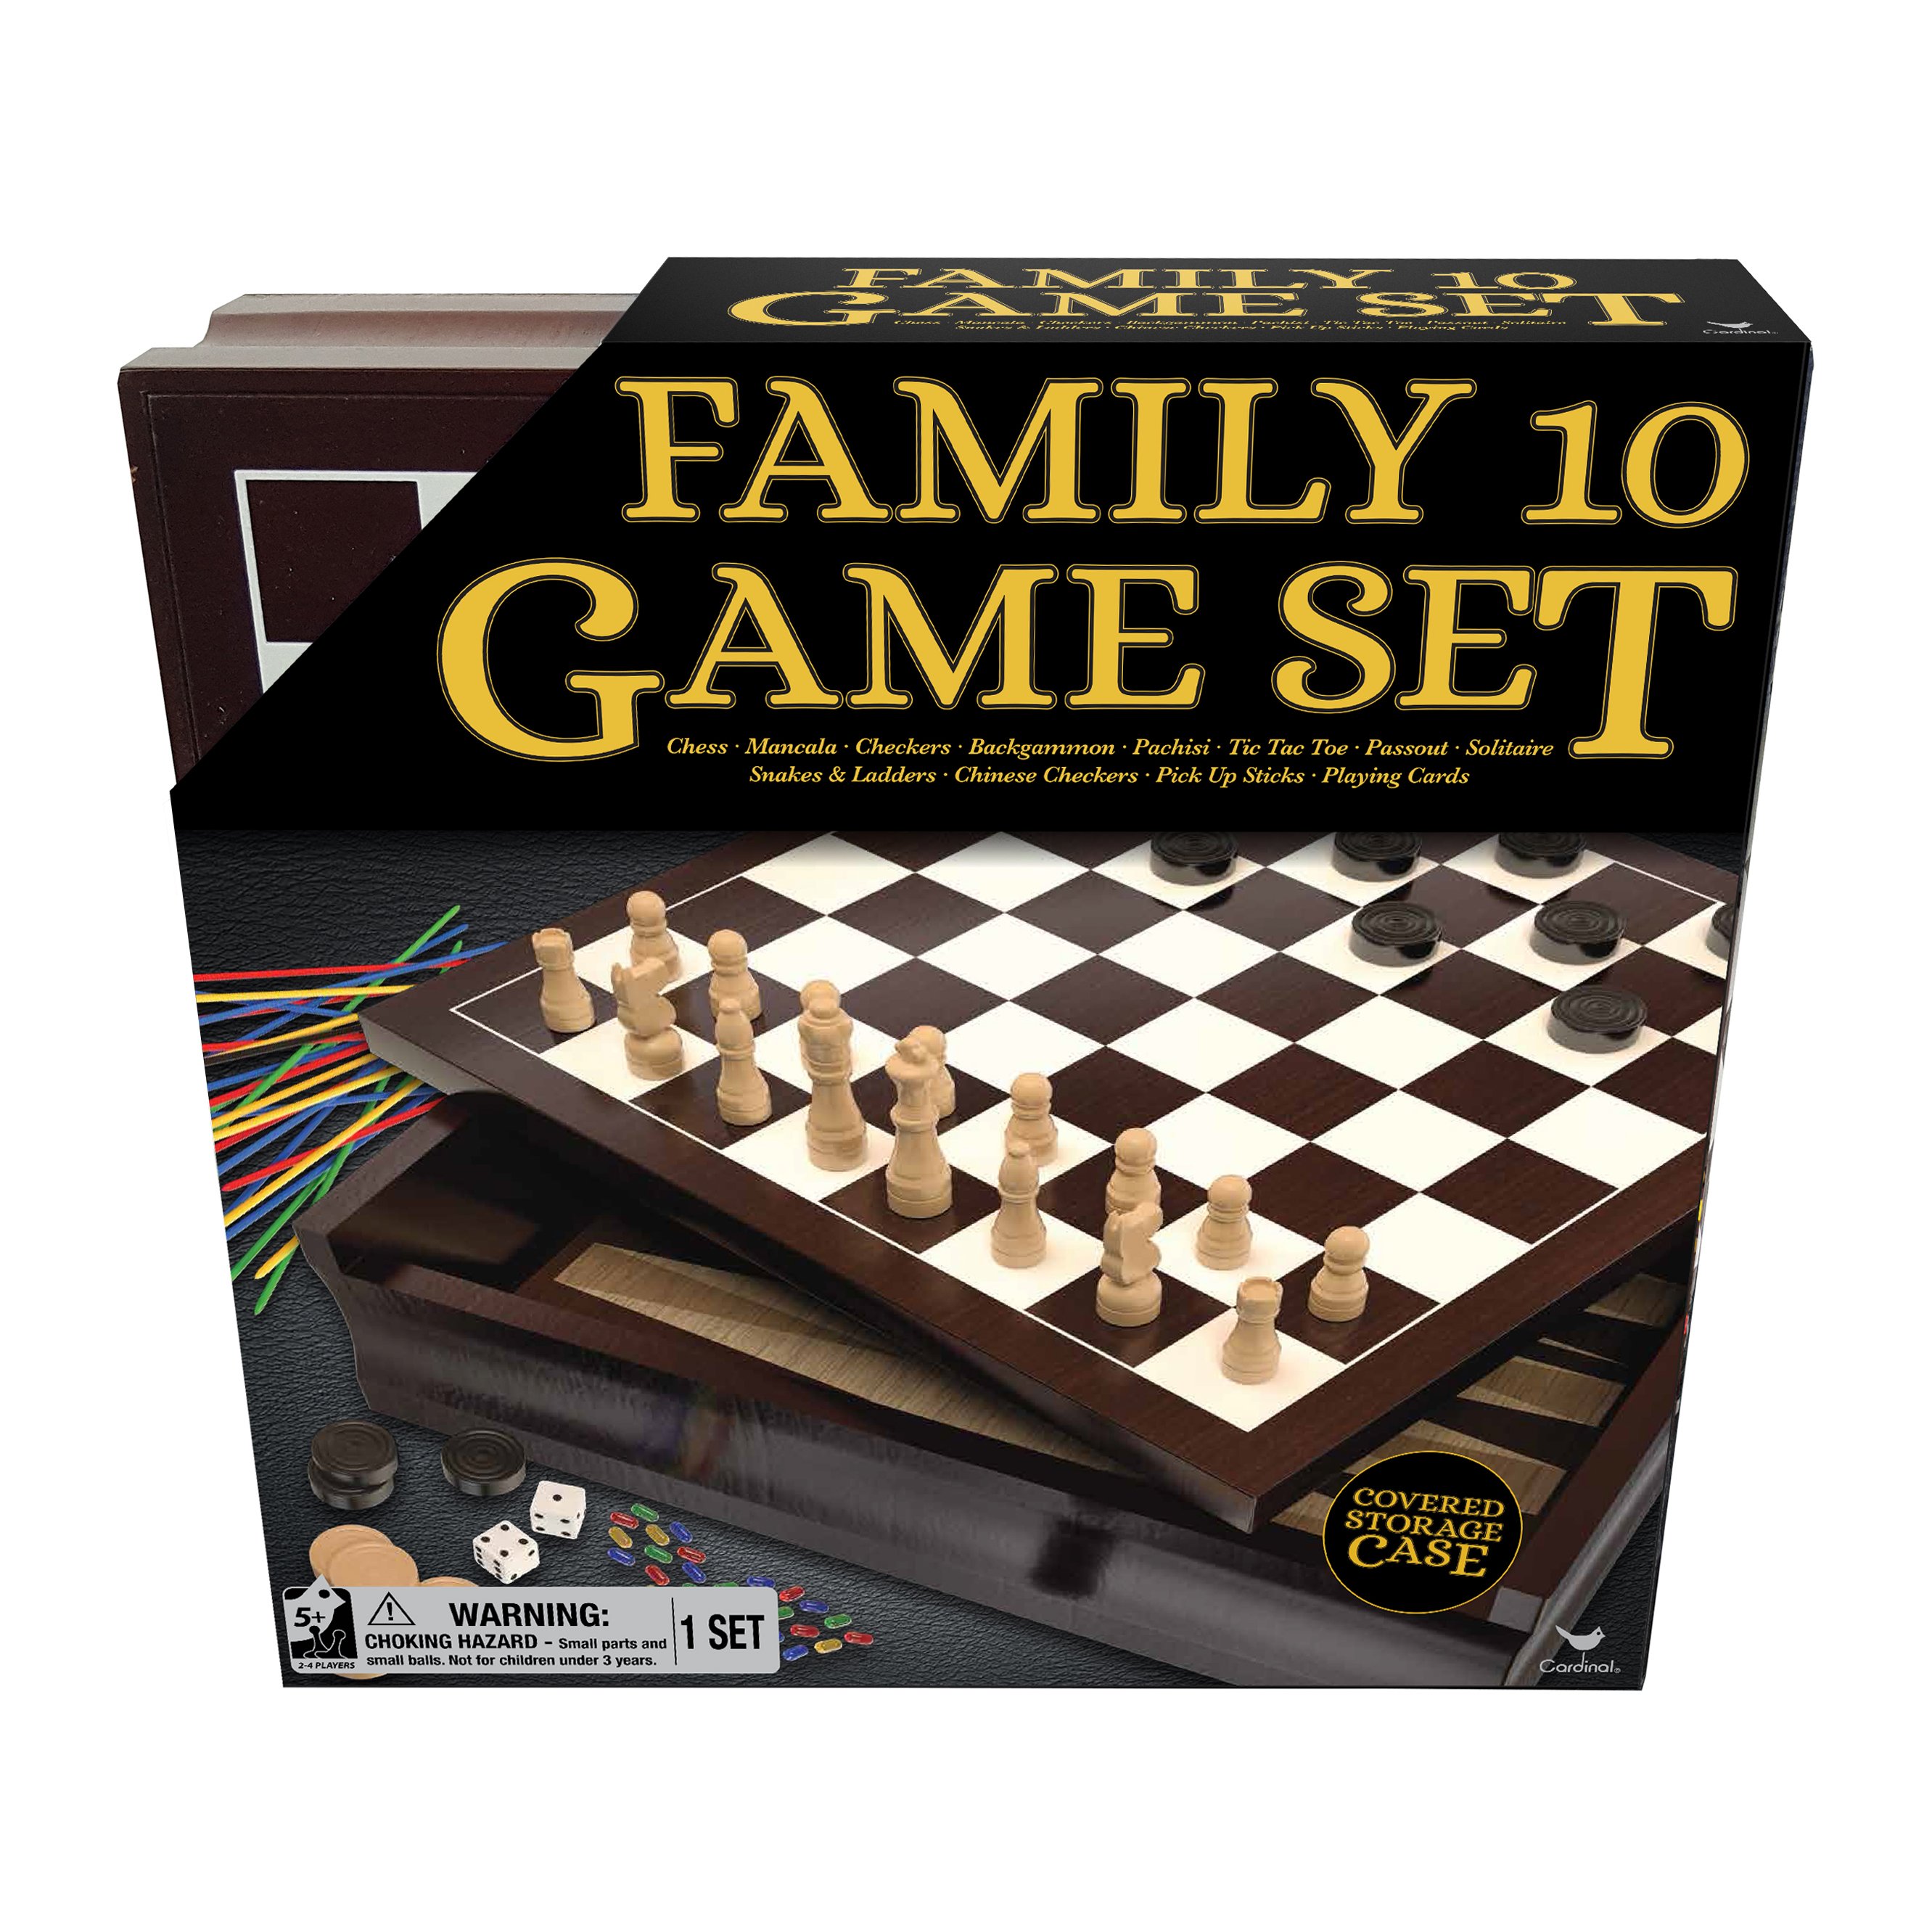 31663 CLASSIC GAMES CHECKERS 24 LIGHT & DARK WOOD PIECES BOARD GAME FAMILY 